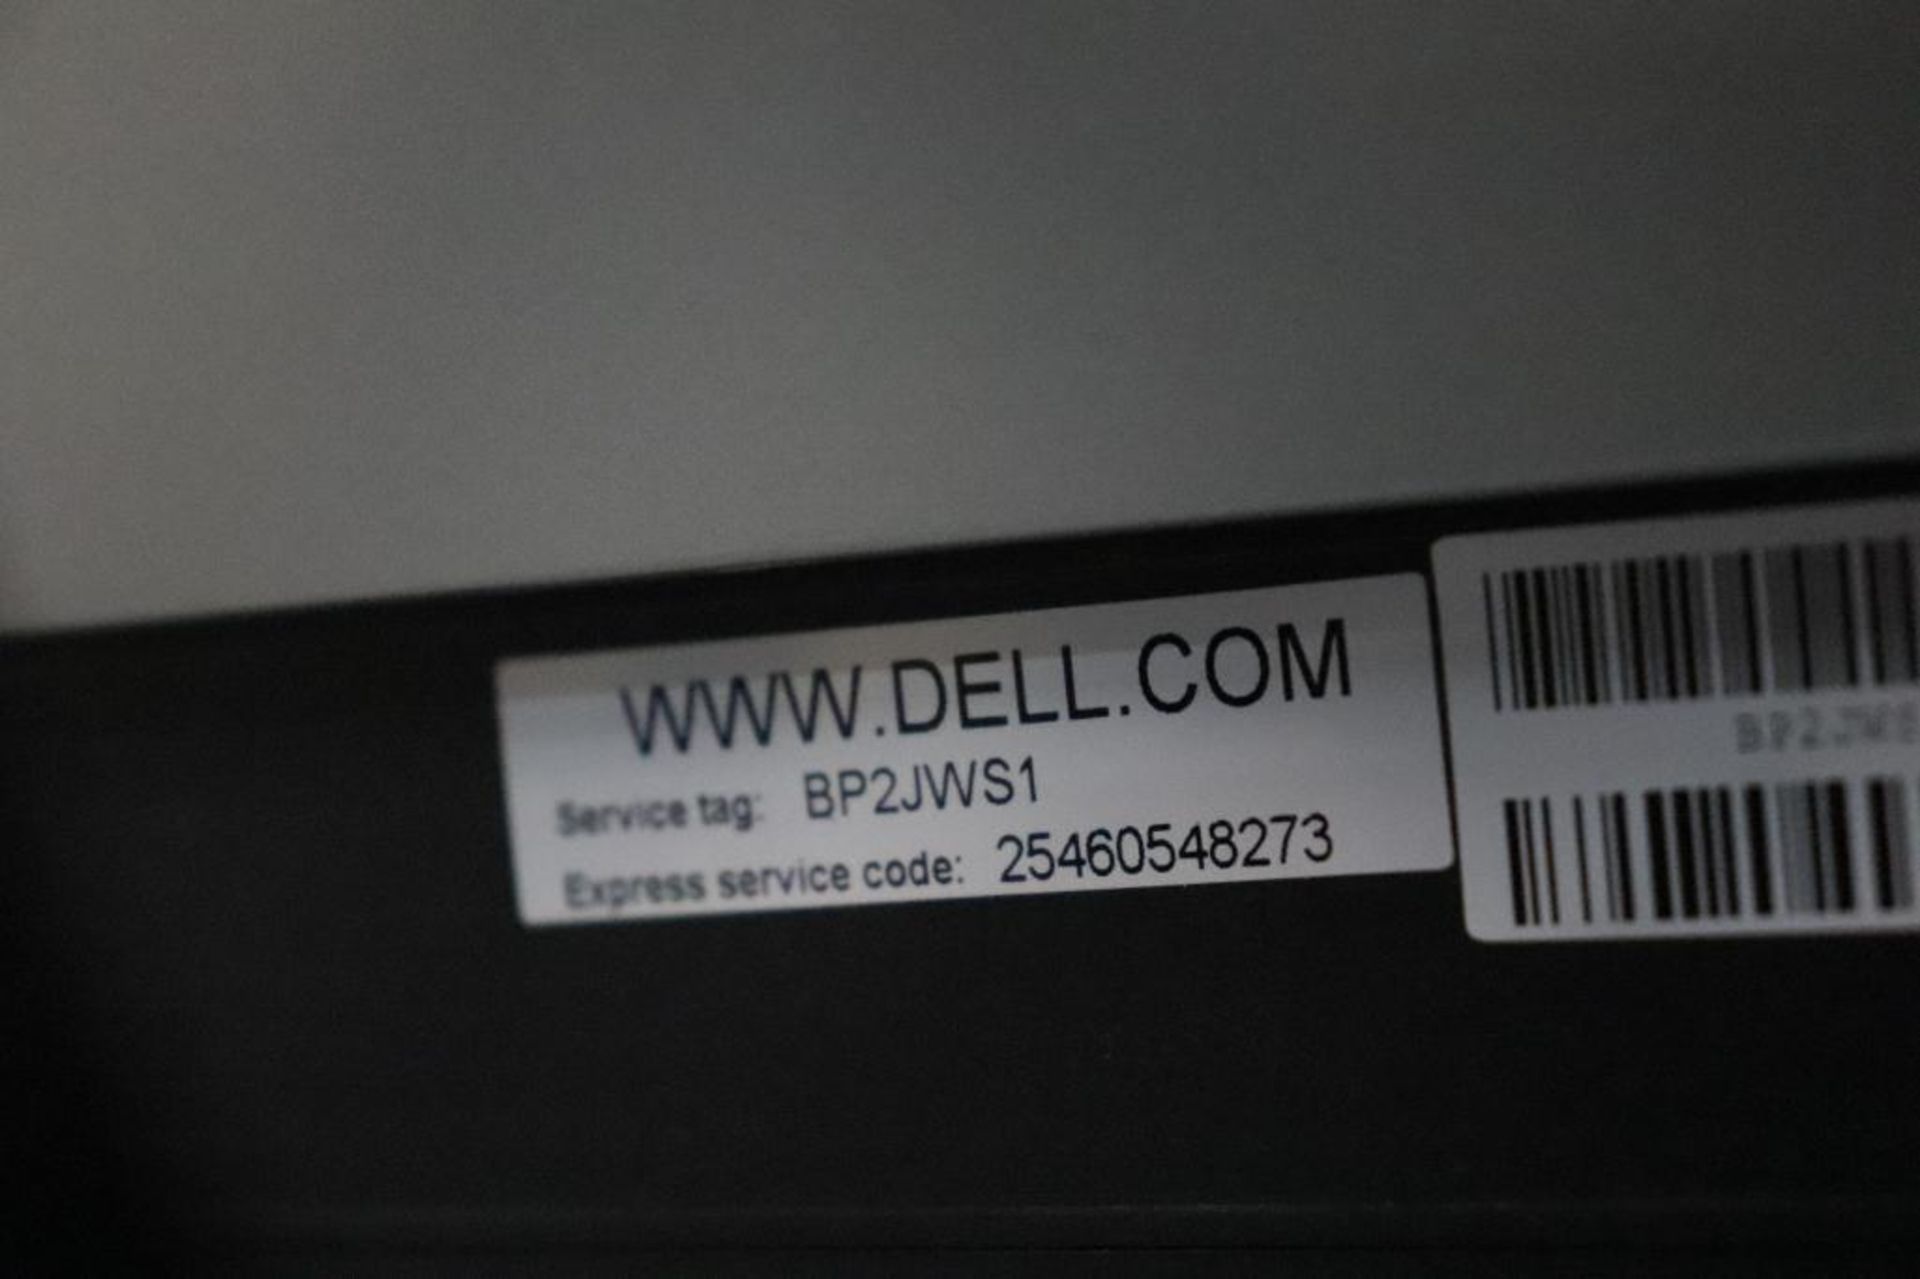 Dell Inspiron One 2330 All-In-One PC - Image 5 of 6